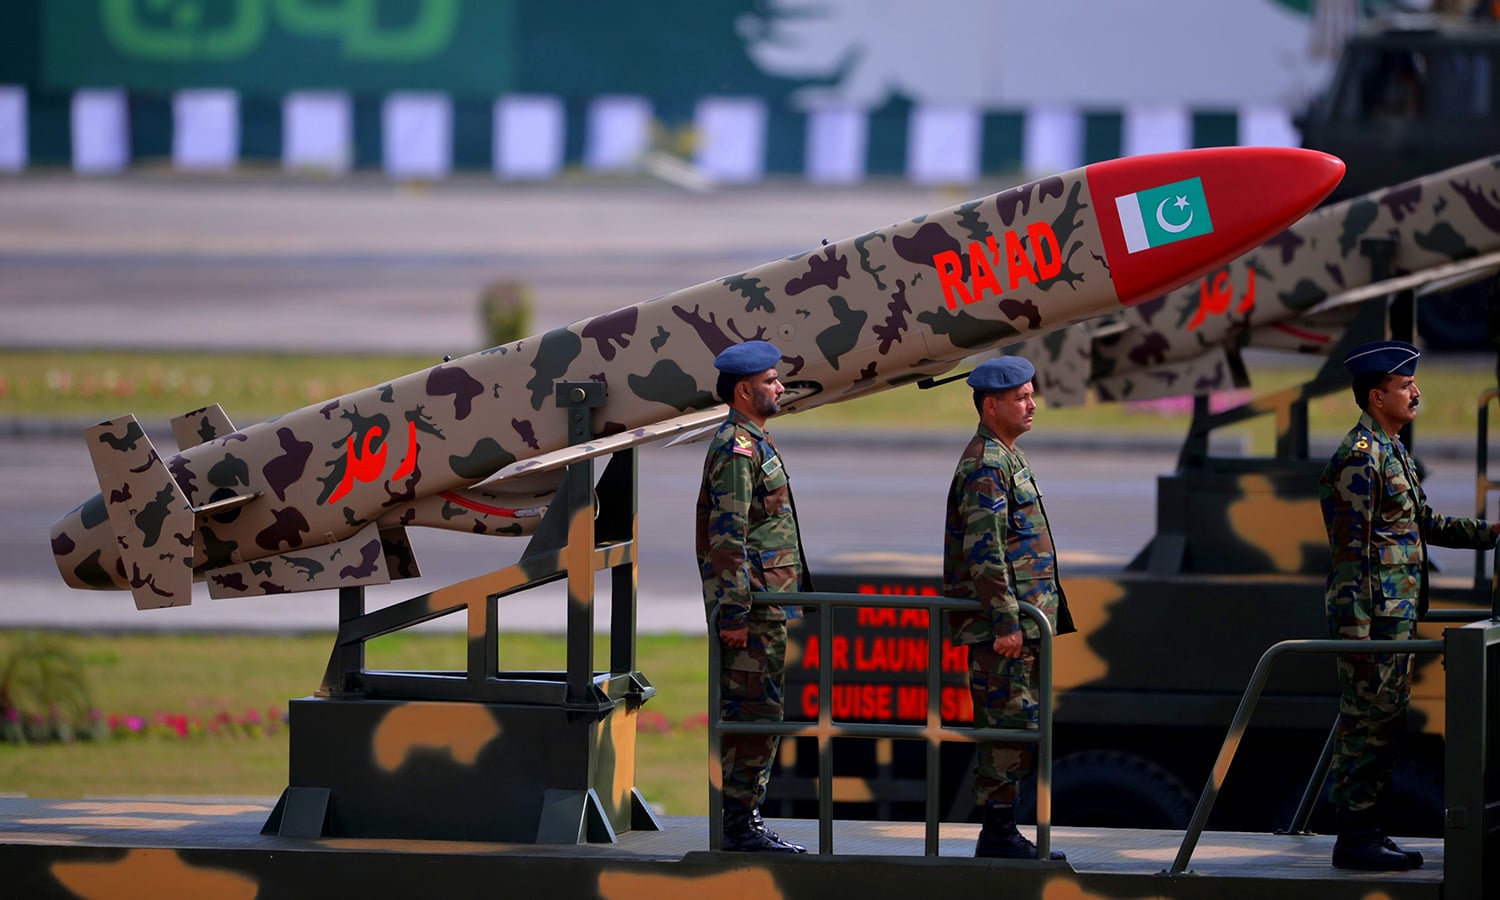 pakistani army soldiers travel on a vehicle carrying cruise missile ra 039 ad during the pakistan day military parade in islamabad on march 23 2016 photo reuters pakistan national day commemorates the passing of the lahore resolution when a separate nation for the muslims of the british indian empire was demanded on march 23 1940 afp photo aamir qureshi